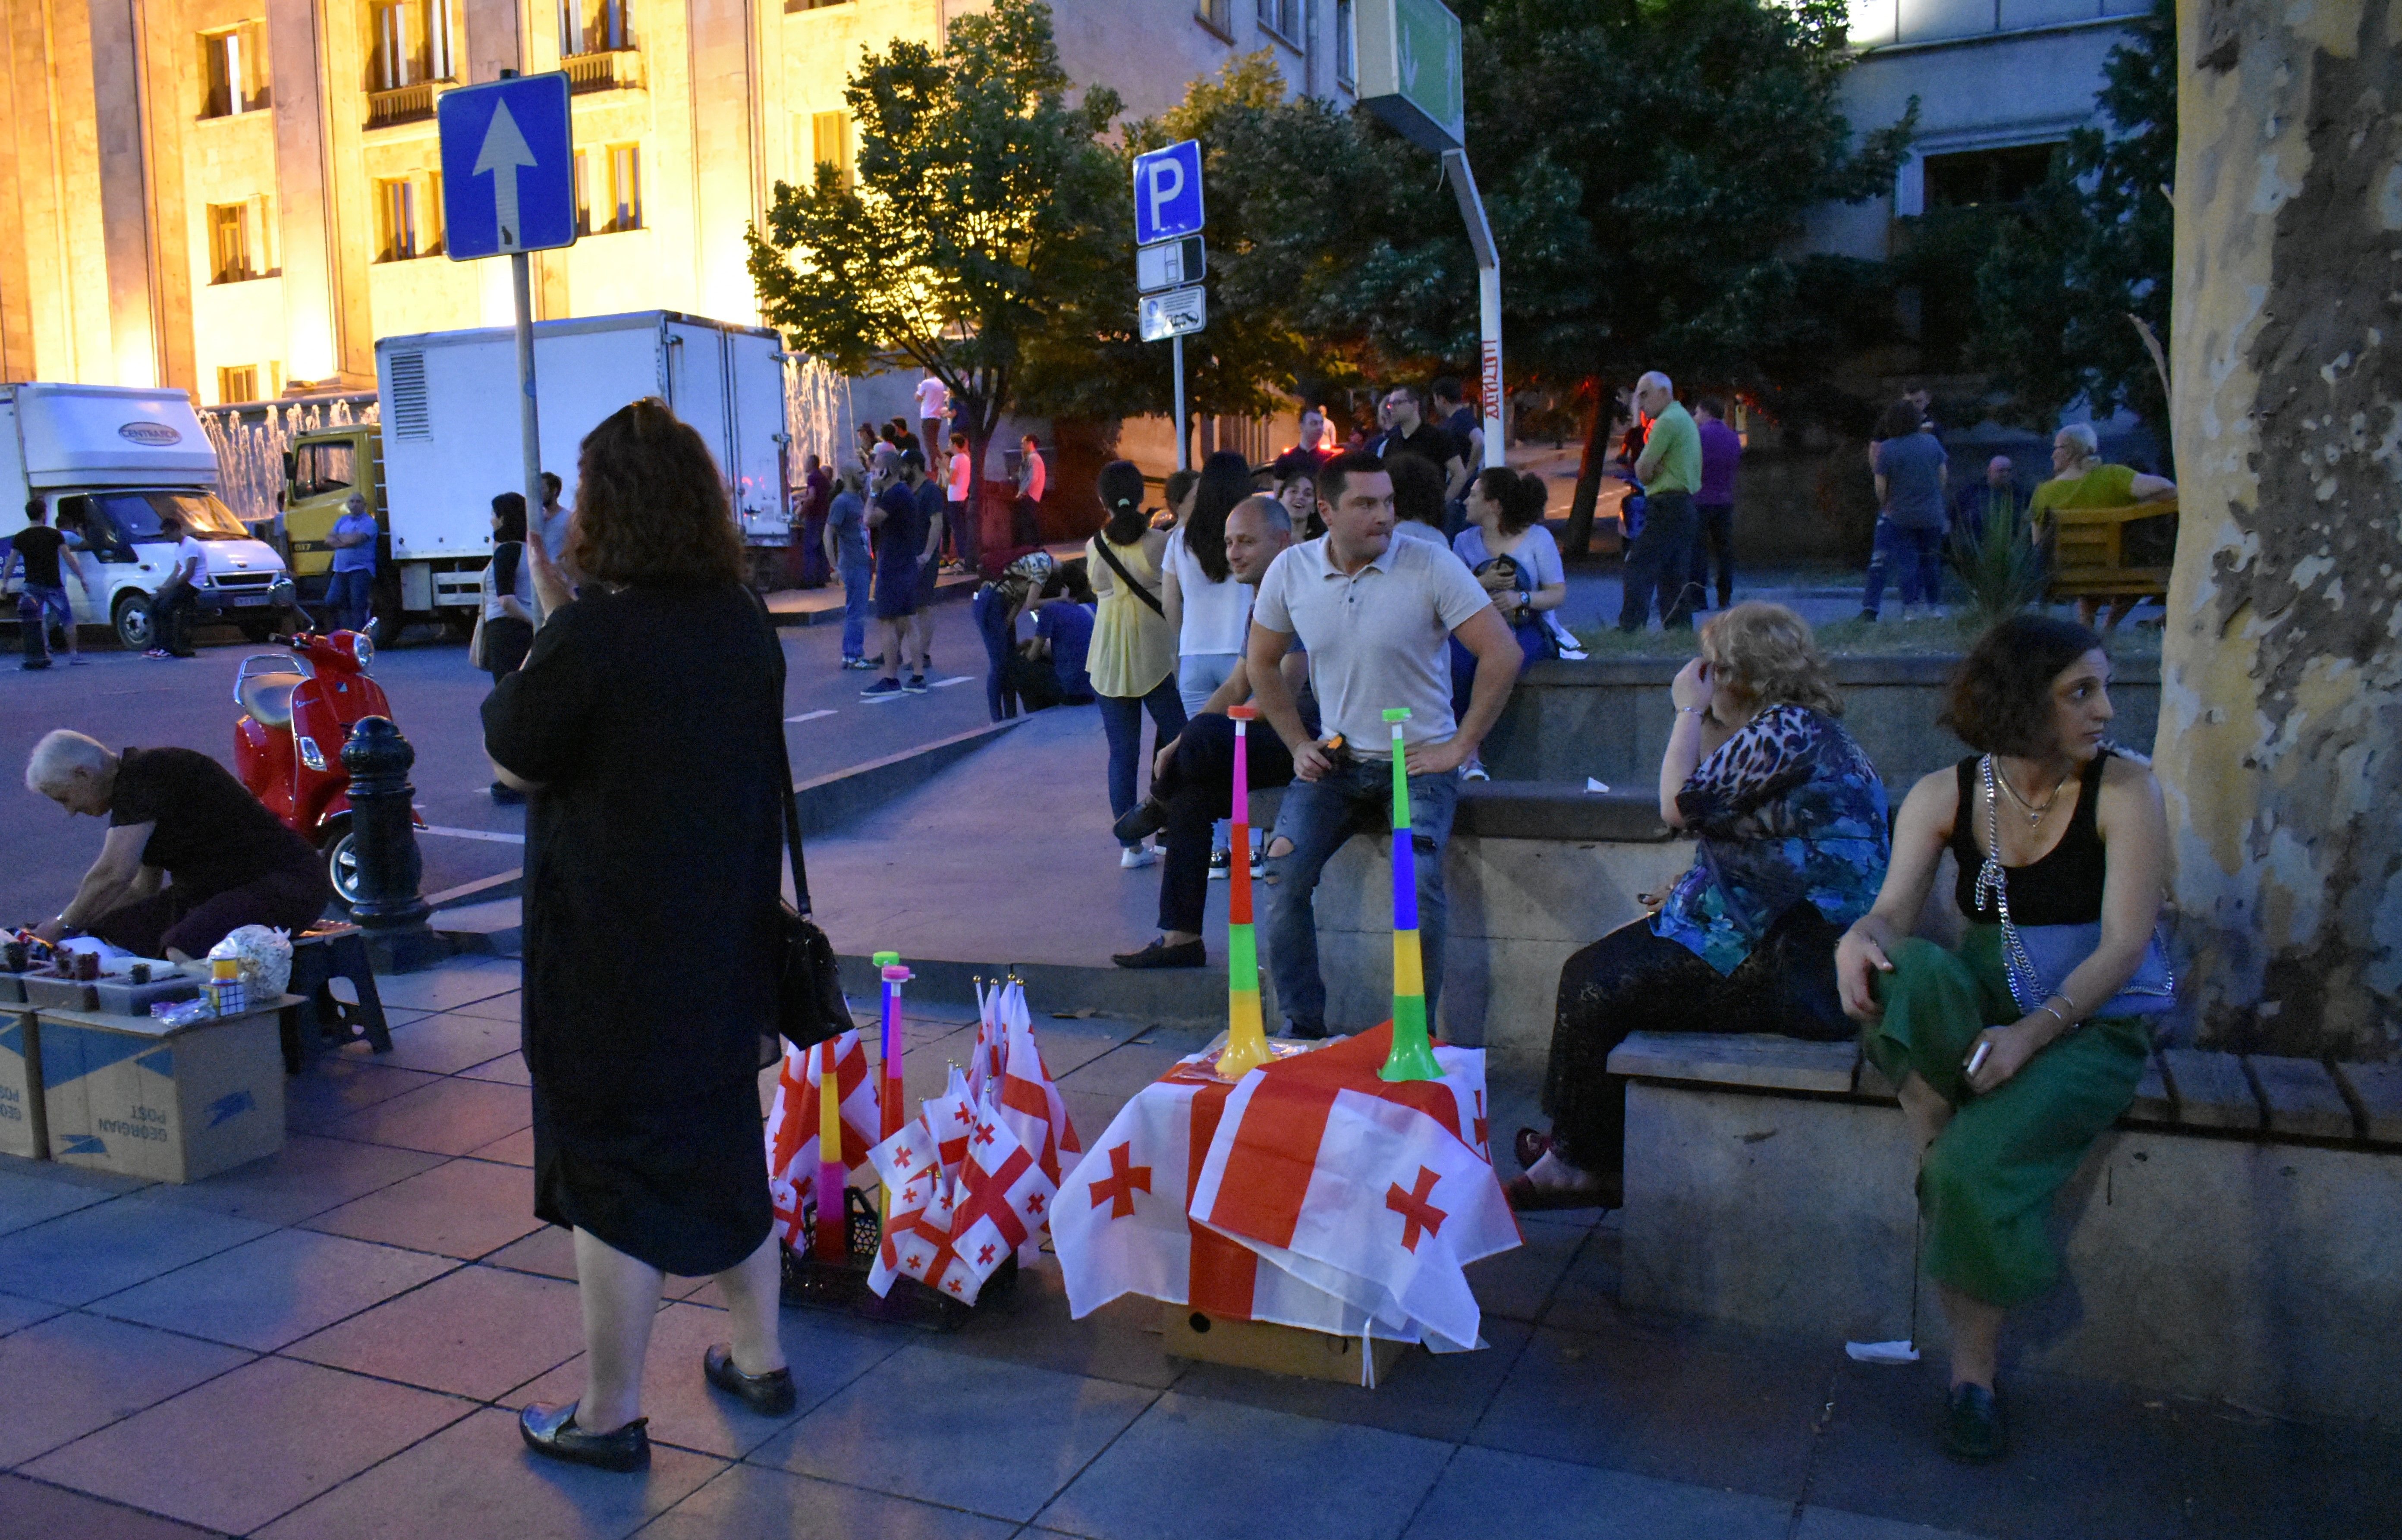 Women sell flags to protesters on Rustaveli Avenue in Tbilisi. Image by Kaitlyn Johnson. Georgia, 2019.